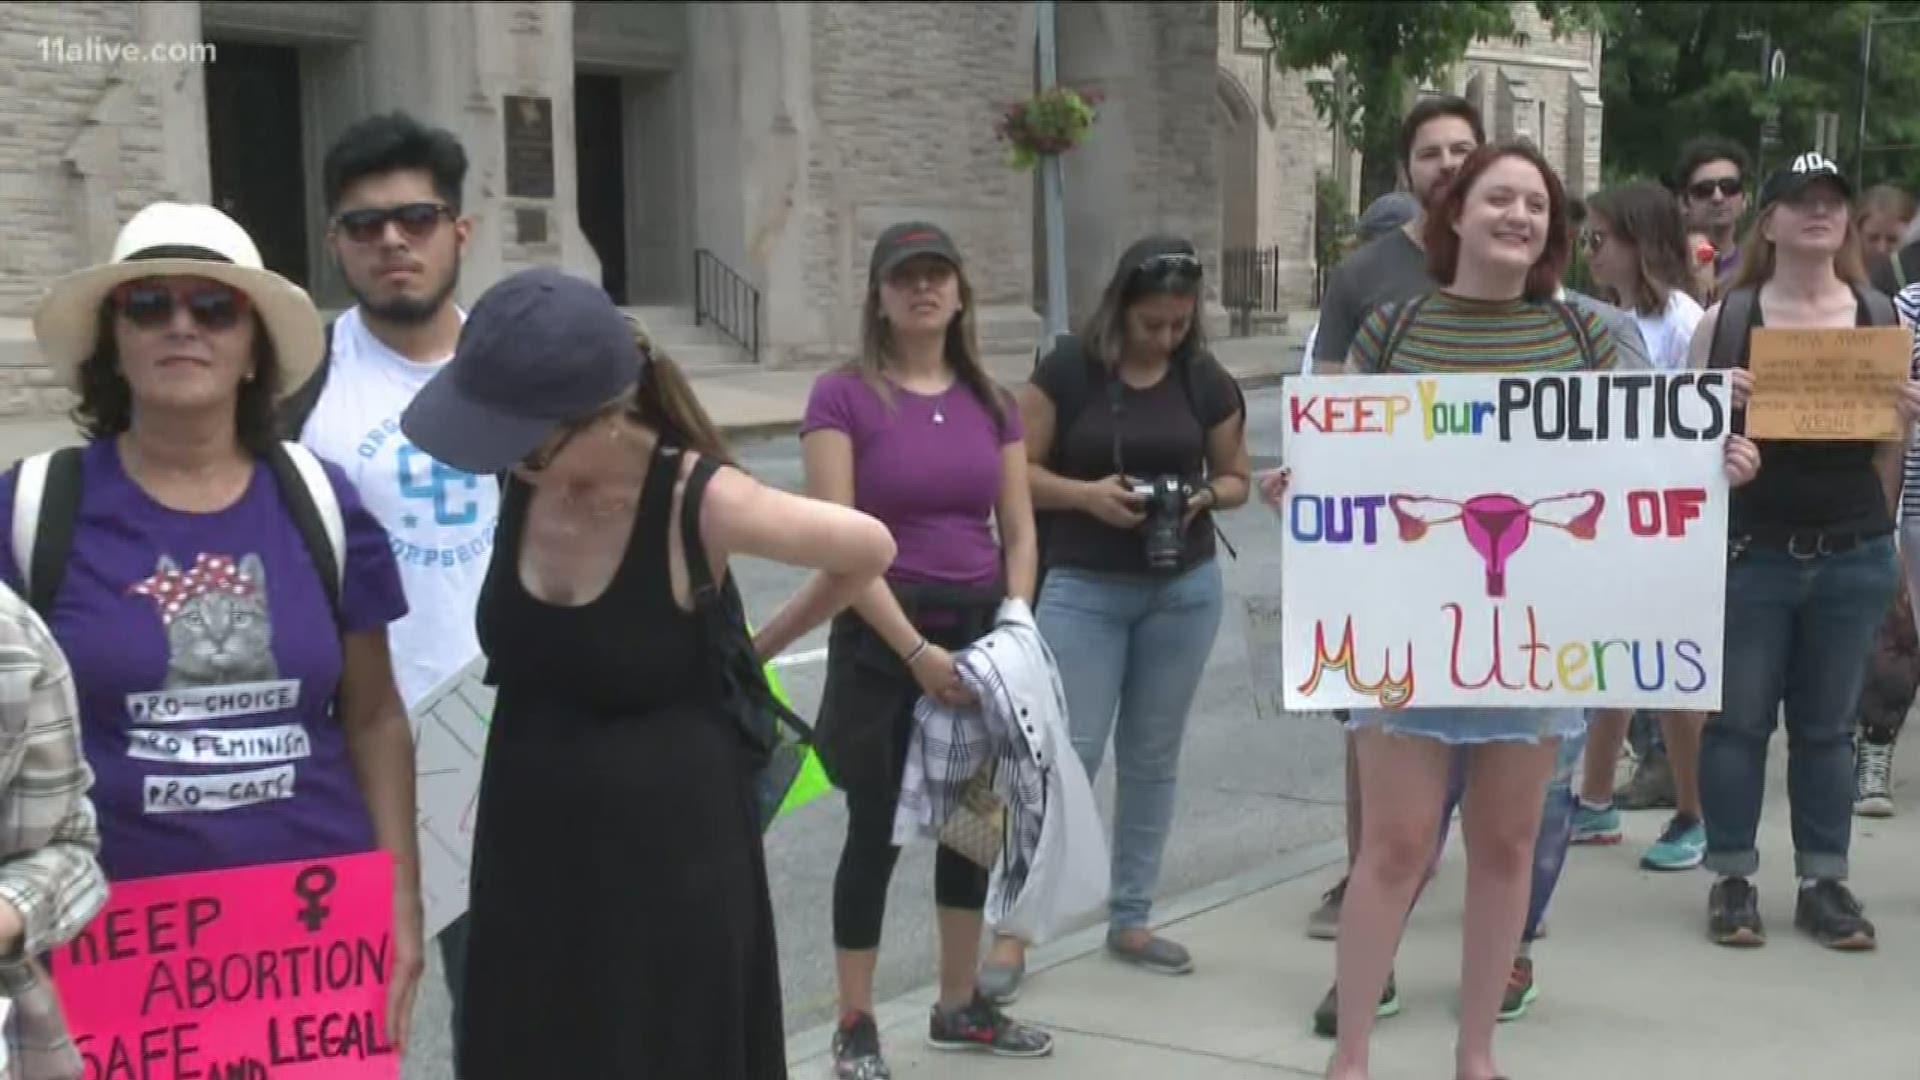 A group organized by 5 Million Women for Reproductive Rights gathered at the Georgia State Capitol to protest the state's 'Heartbeat' abortion law on Saturday, June 22. The group is demanding the repeal of the law, which takes effect in January 2020.